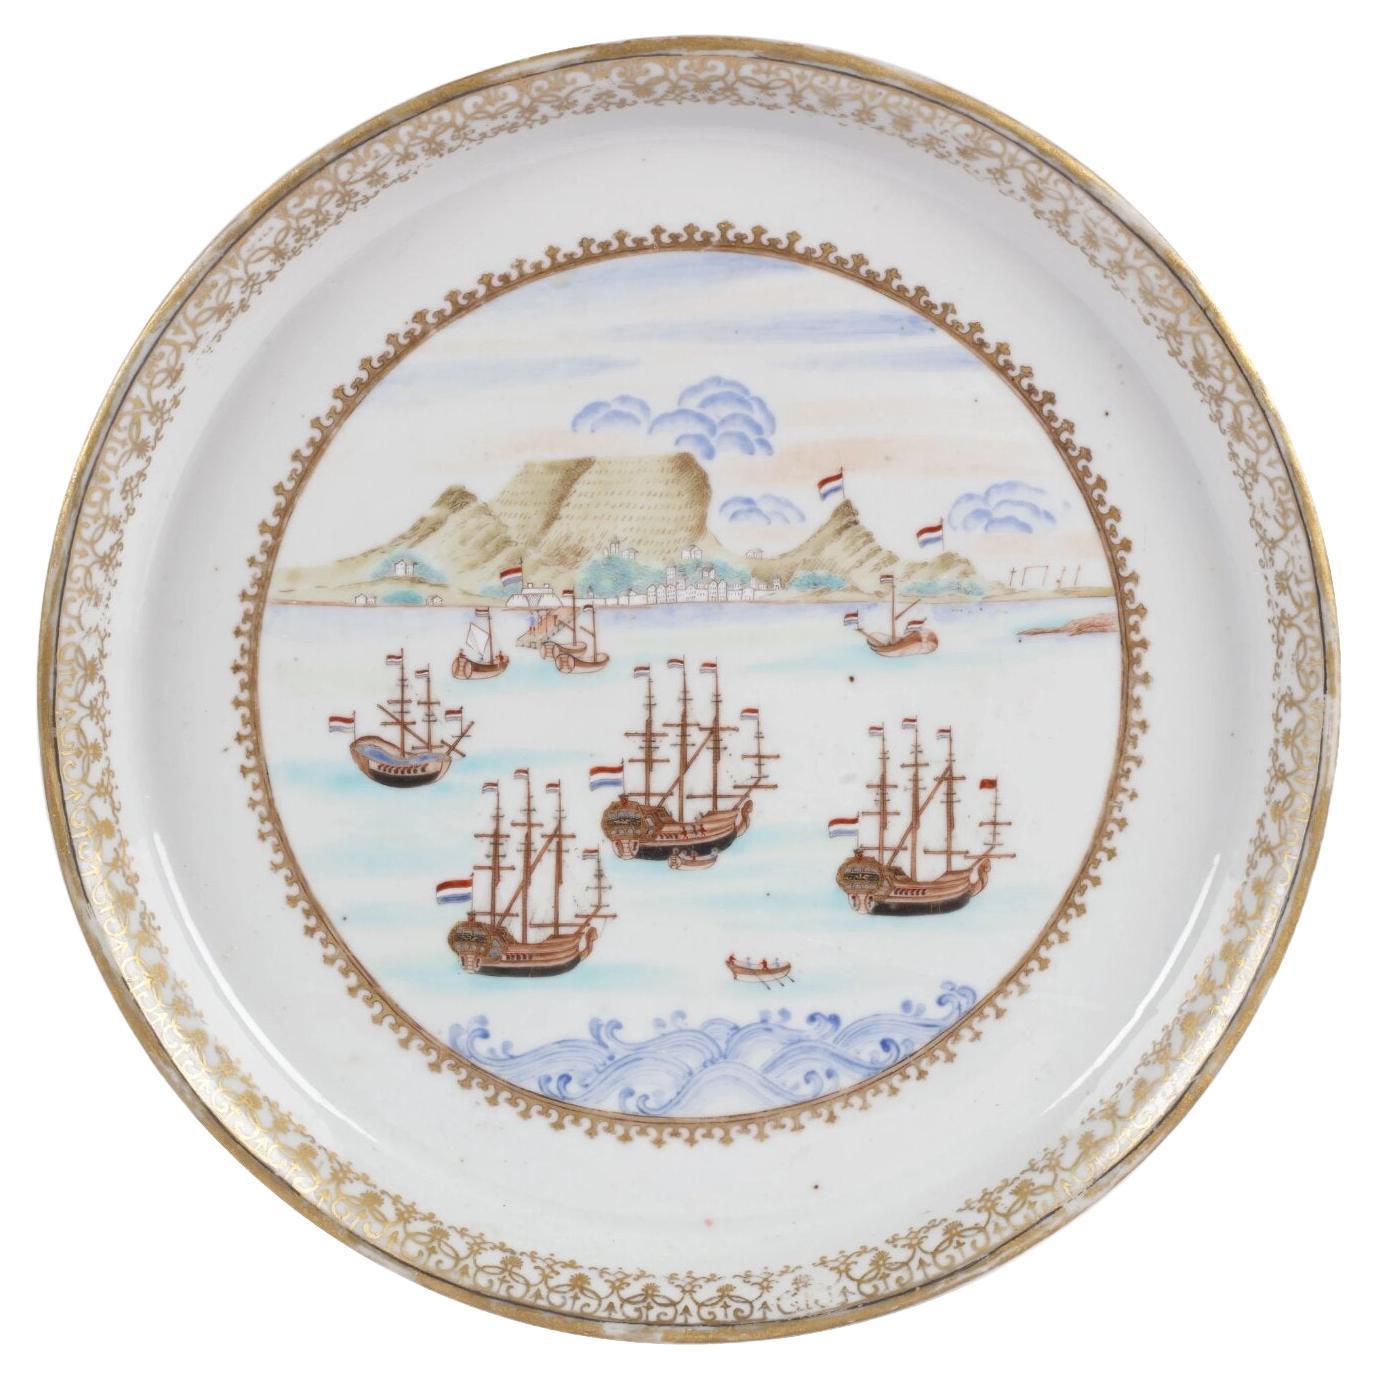 Rare Large Chinese Export Porcelain 'Table Bay' Cape of Good Hope Dish, C. 1740 For Sale